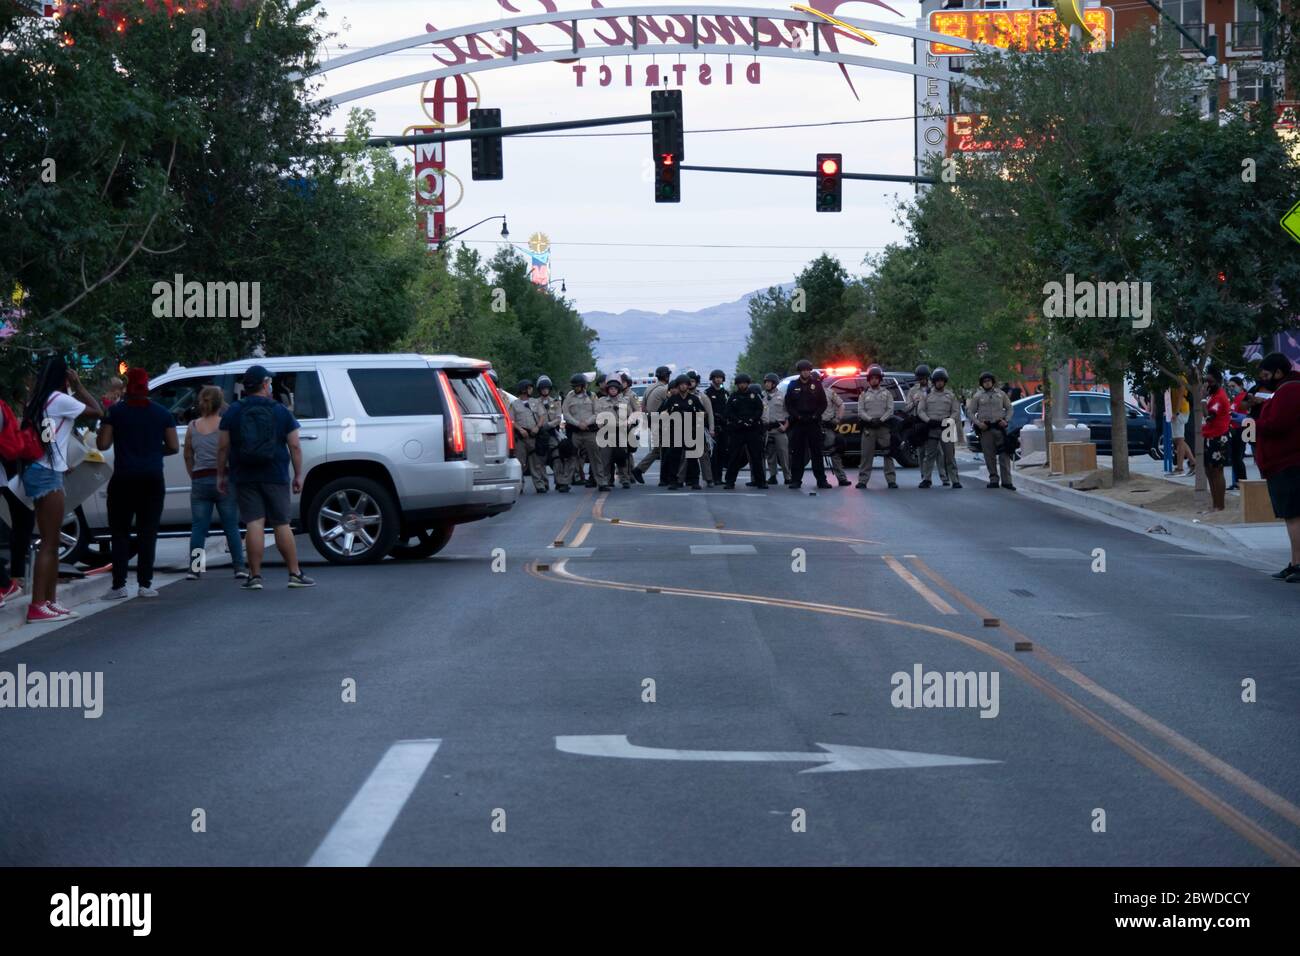 Las Vegas, NV - May 30, 2020: Law enforcement make a human road block barricade line as the protesters gather to protest and march in a nationwide call for changes in the police departments across the country on May 30, 2020 in downtown Las Vegas, Nevada. Credit: Shannon Beelman/The Photo Access Stock Photo